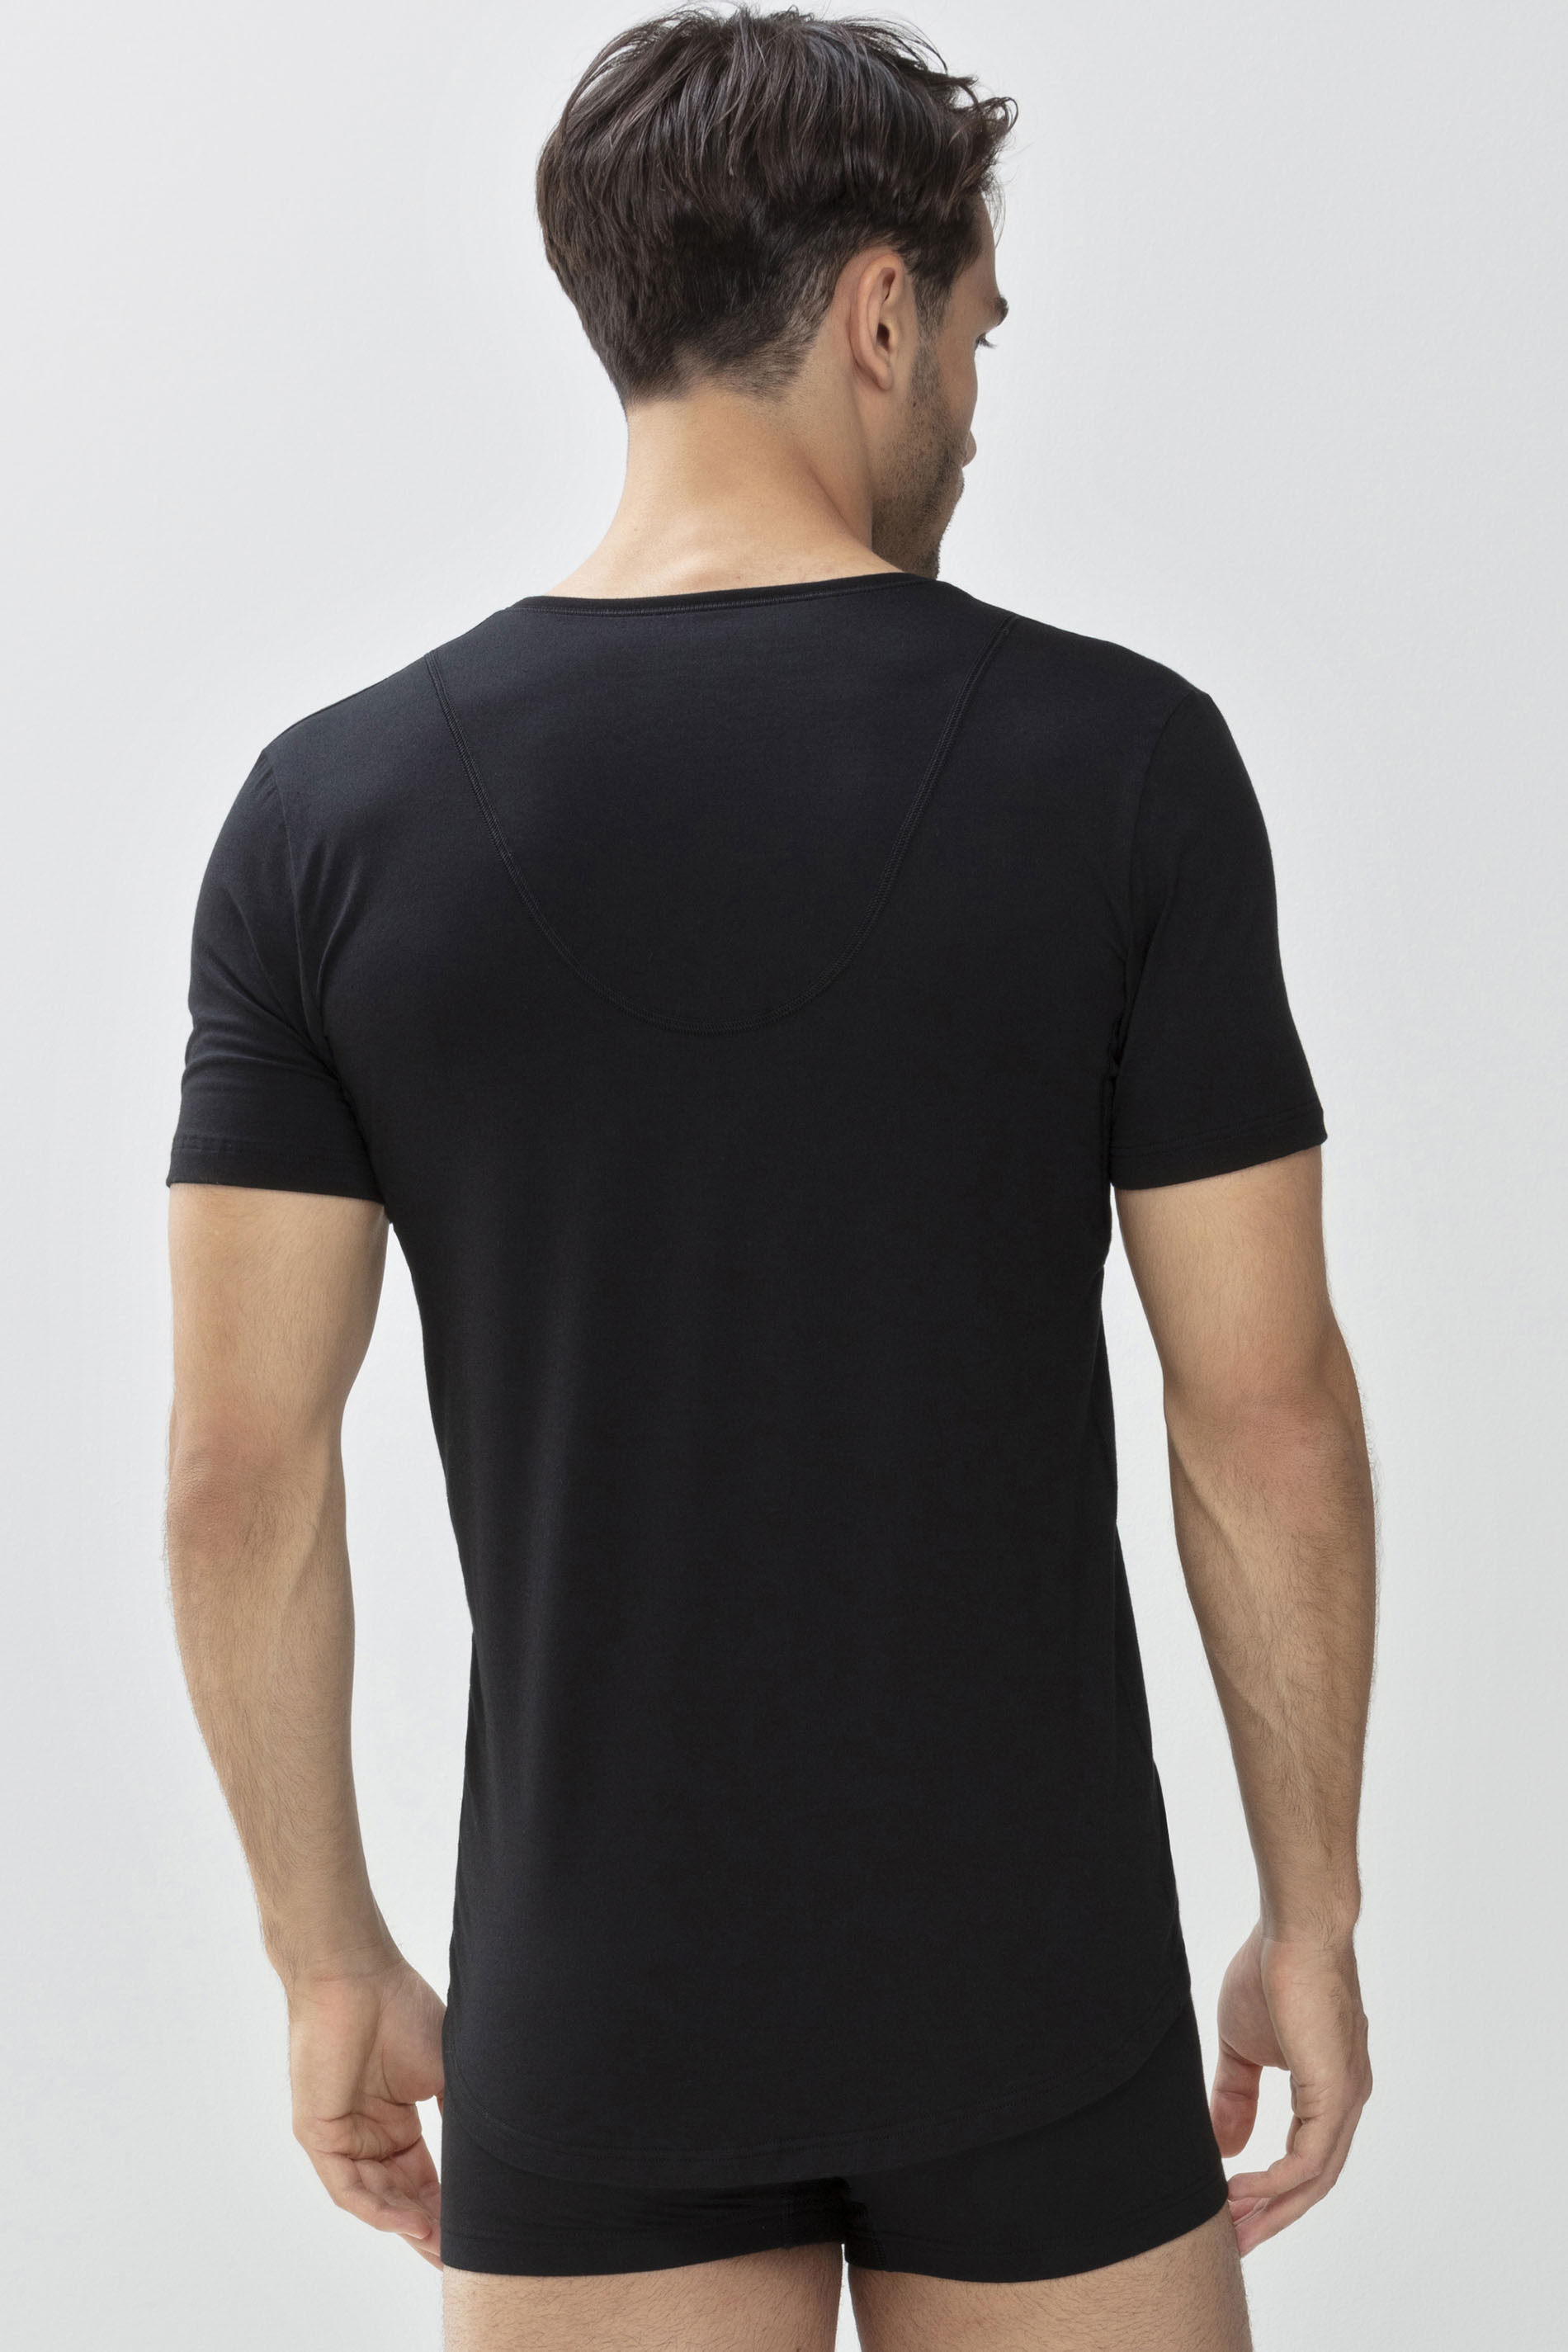 The undershirt - v neck Black Serie Dry Cotton Functional  Rear View | mey®